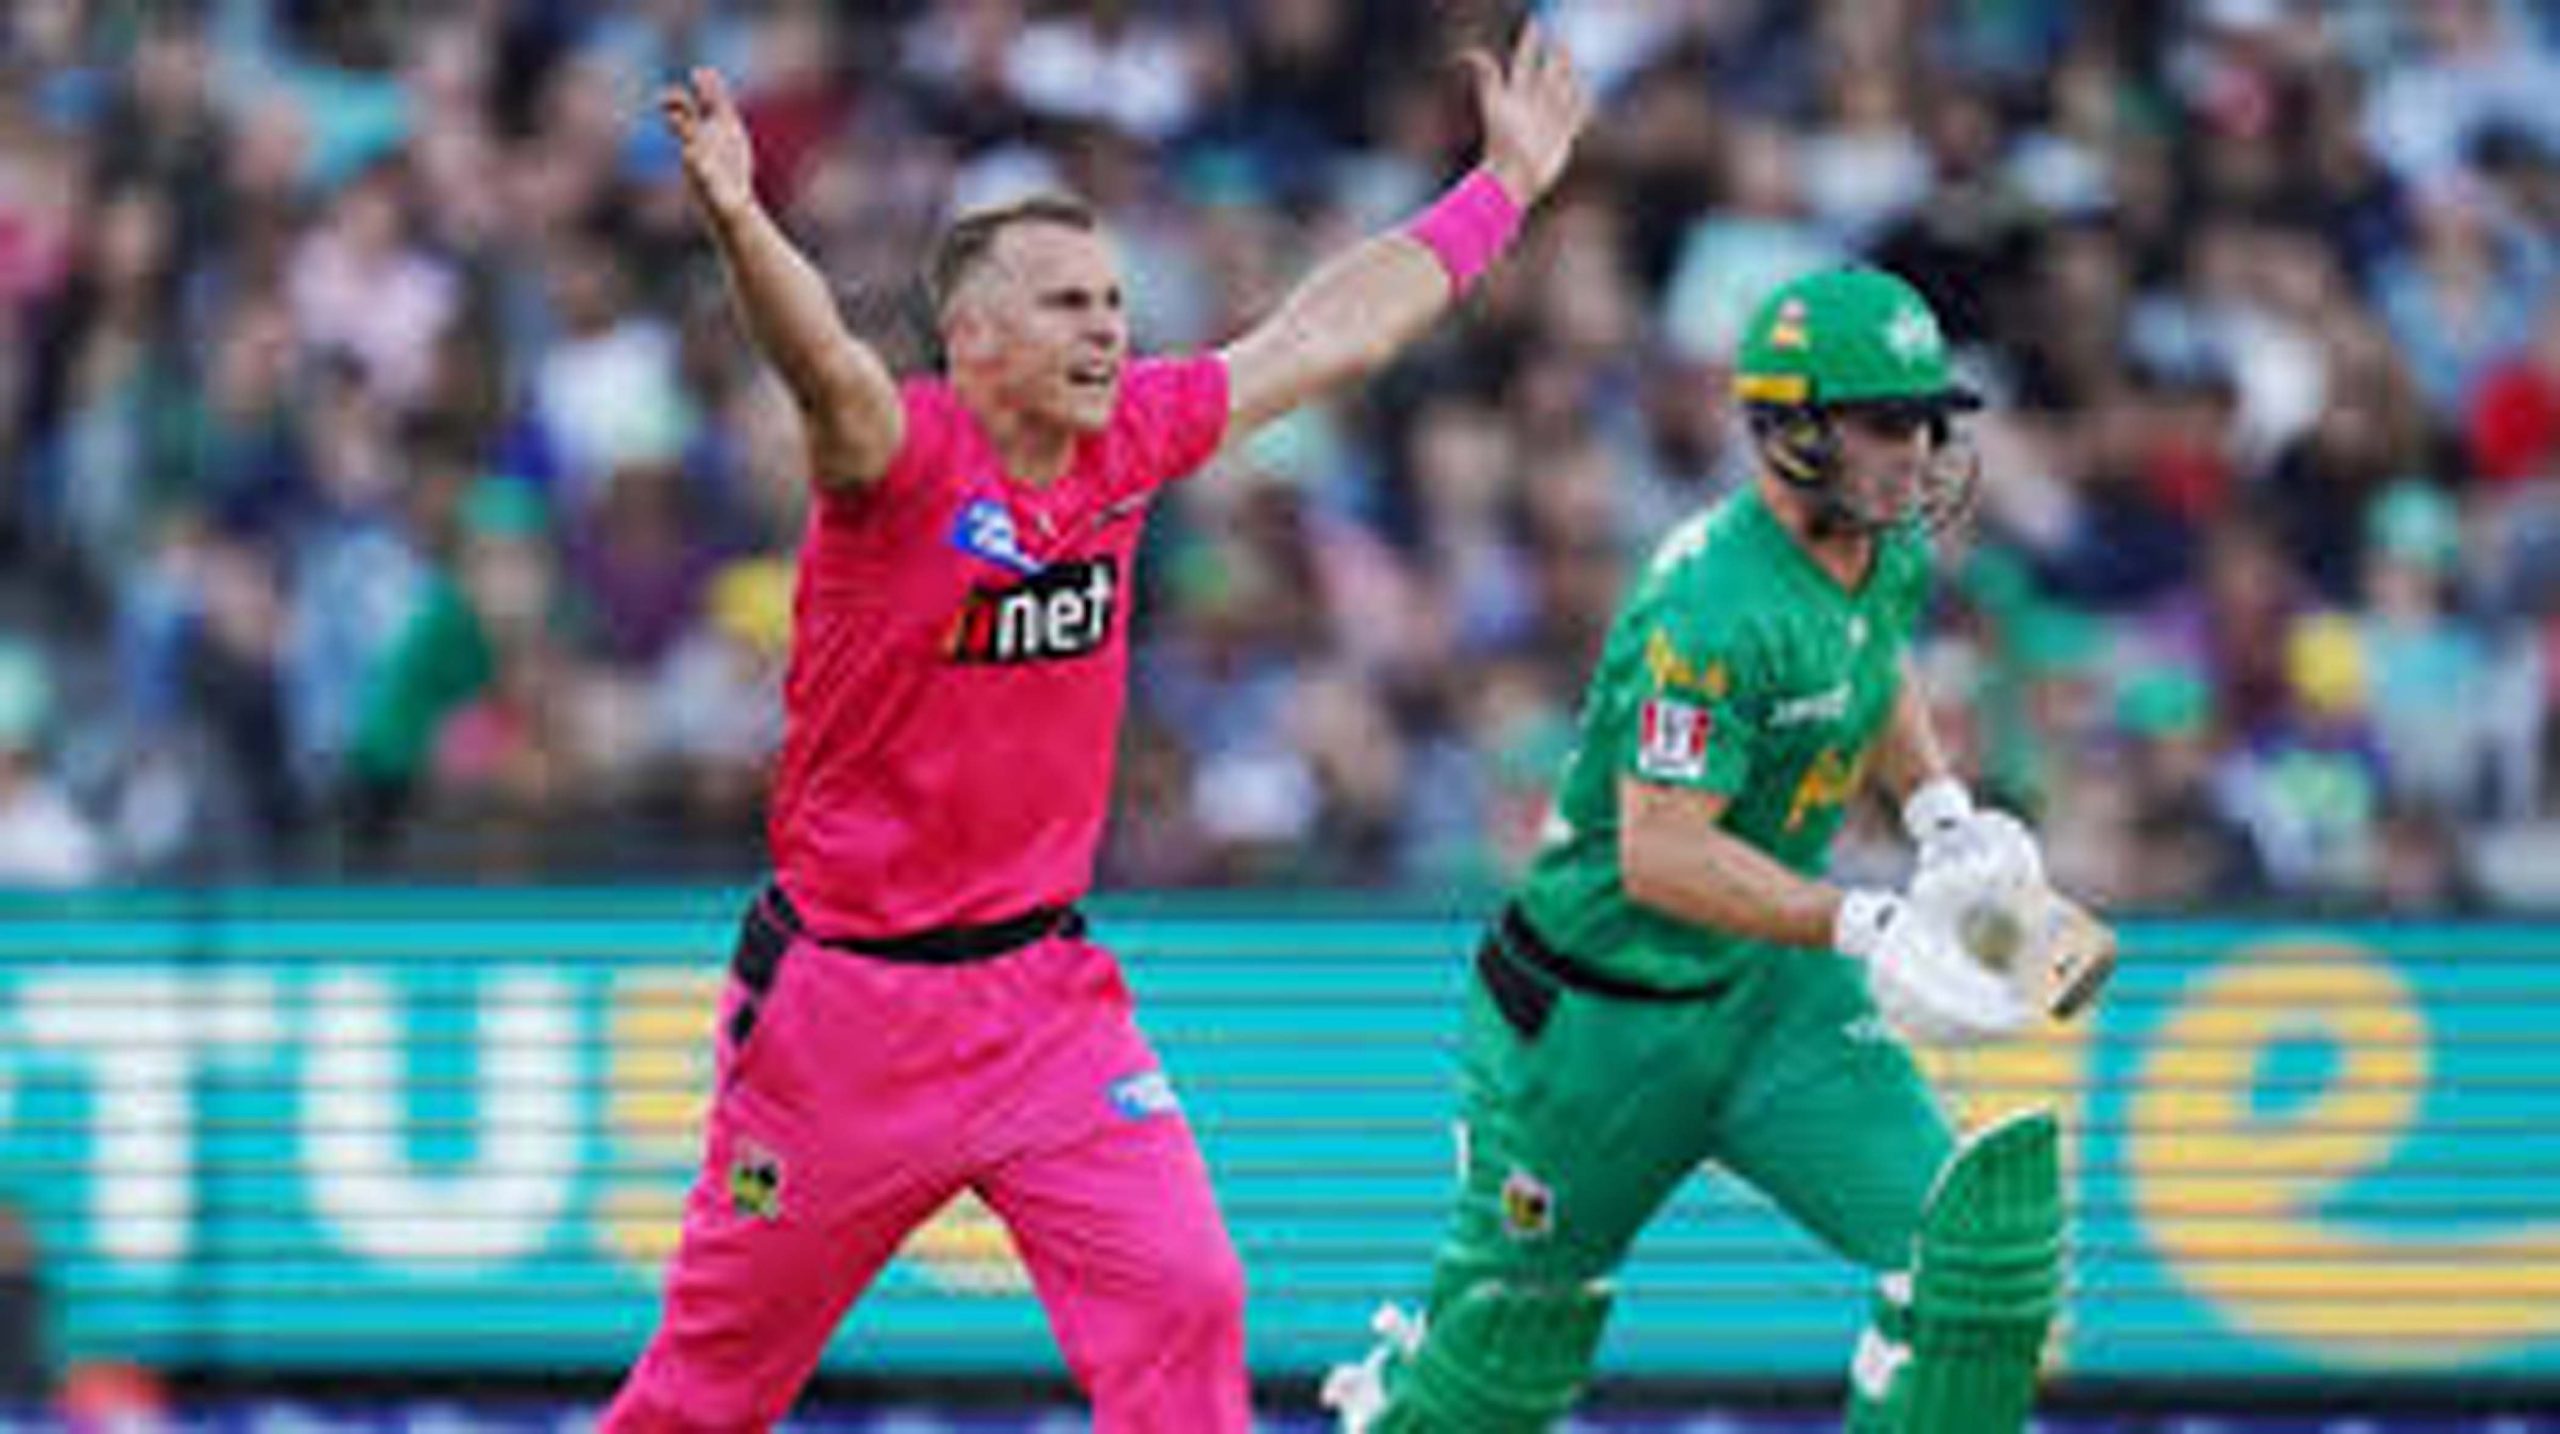 BBL league will collide with India's series, Australian Cricket Board announces schedule